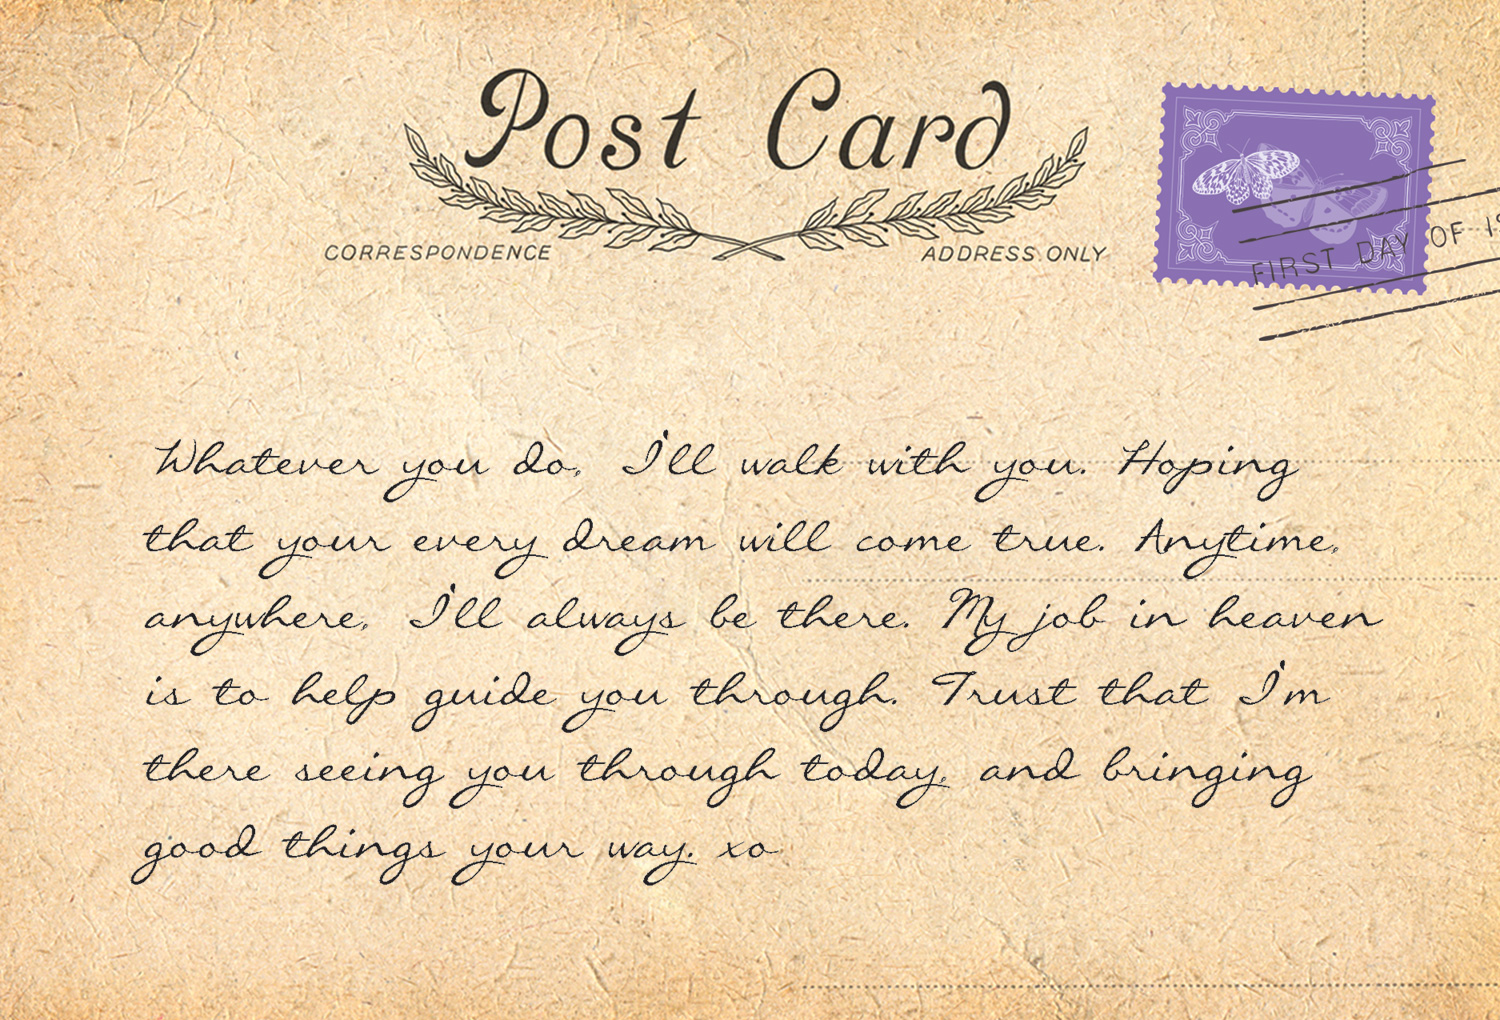 POSTCARDS FROM HEAVEN 2 - back 14